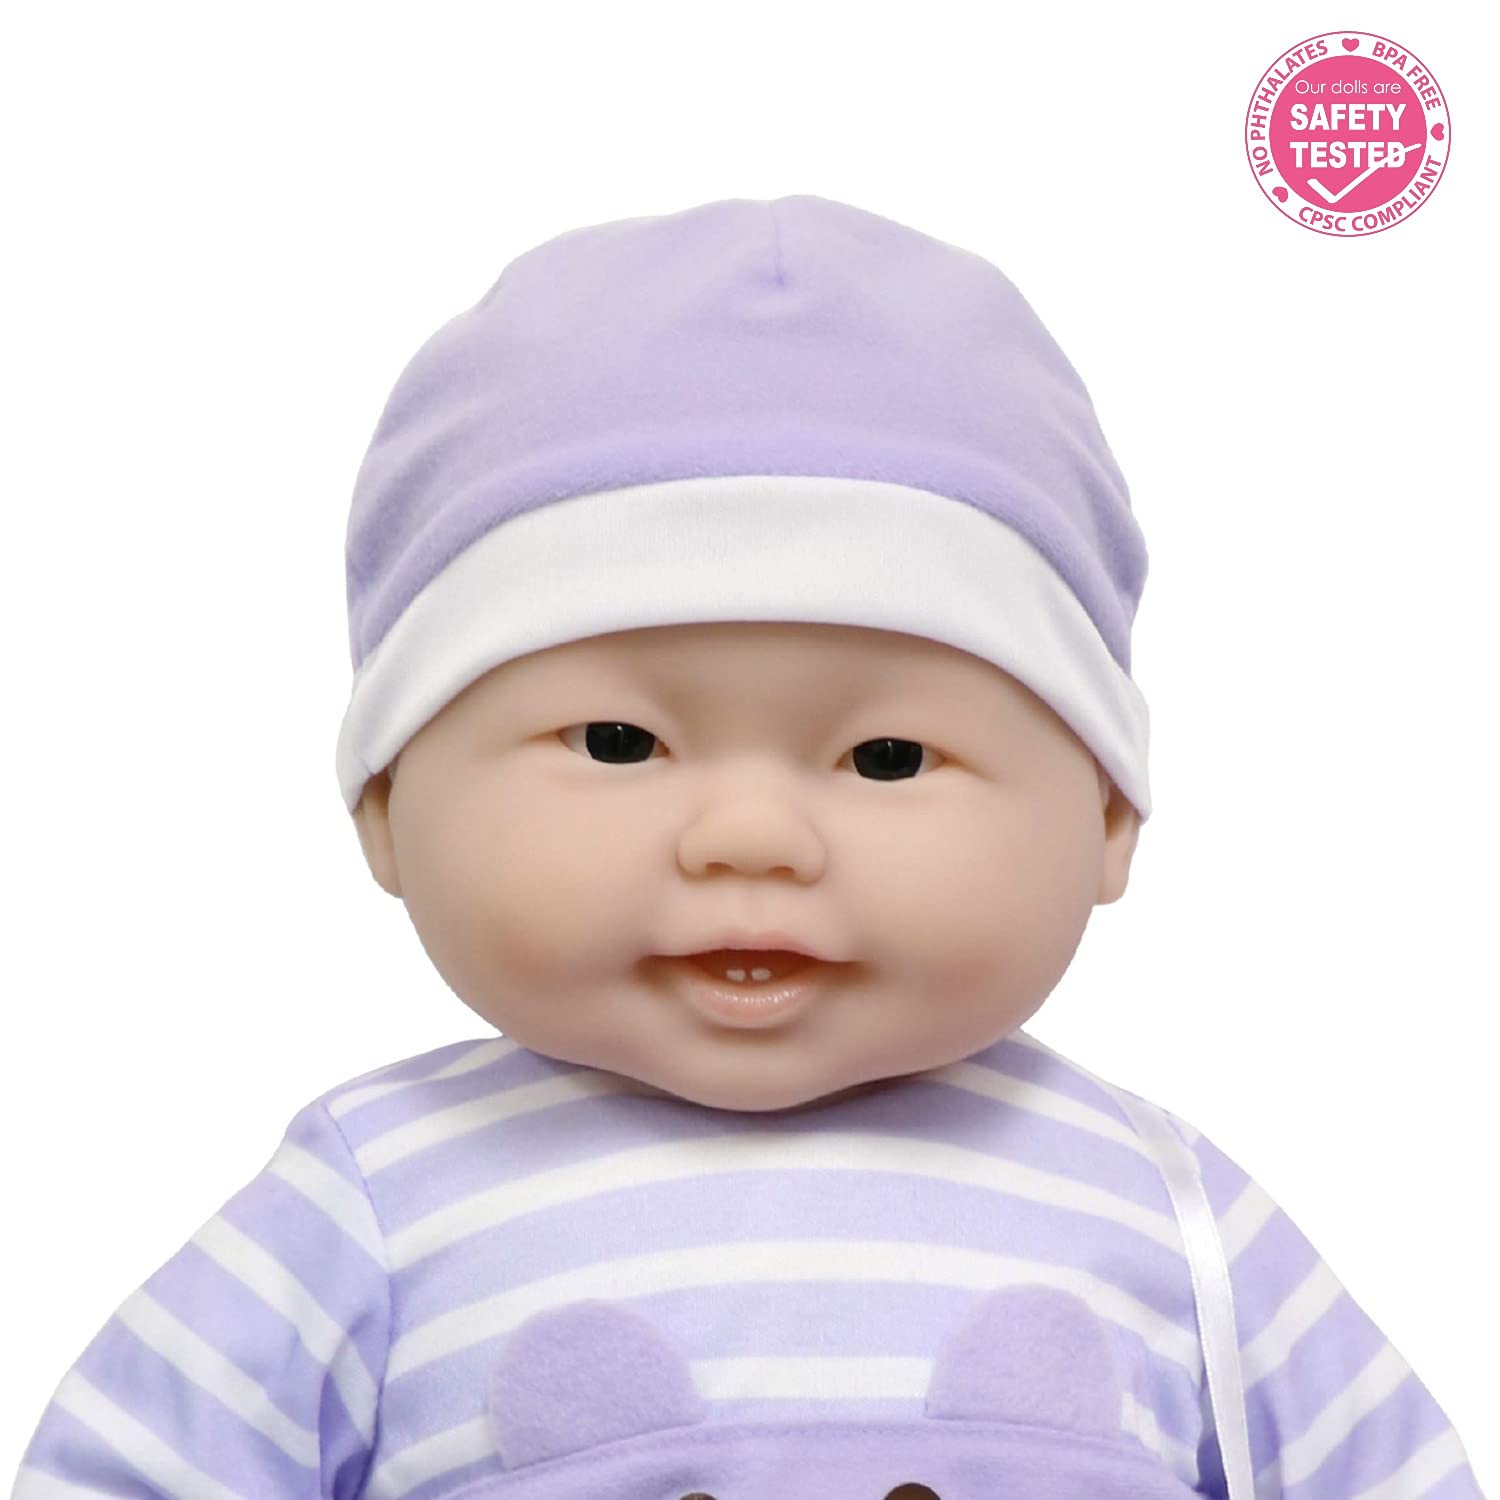 JC Toys Soft and Cuddly 20